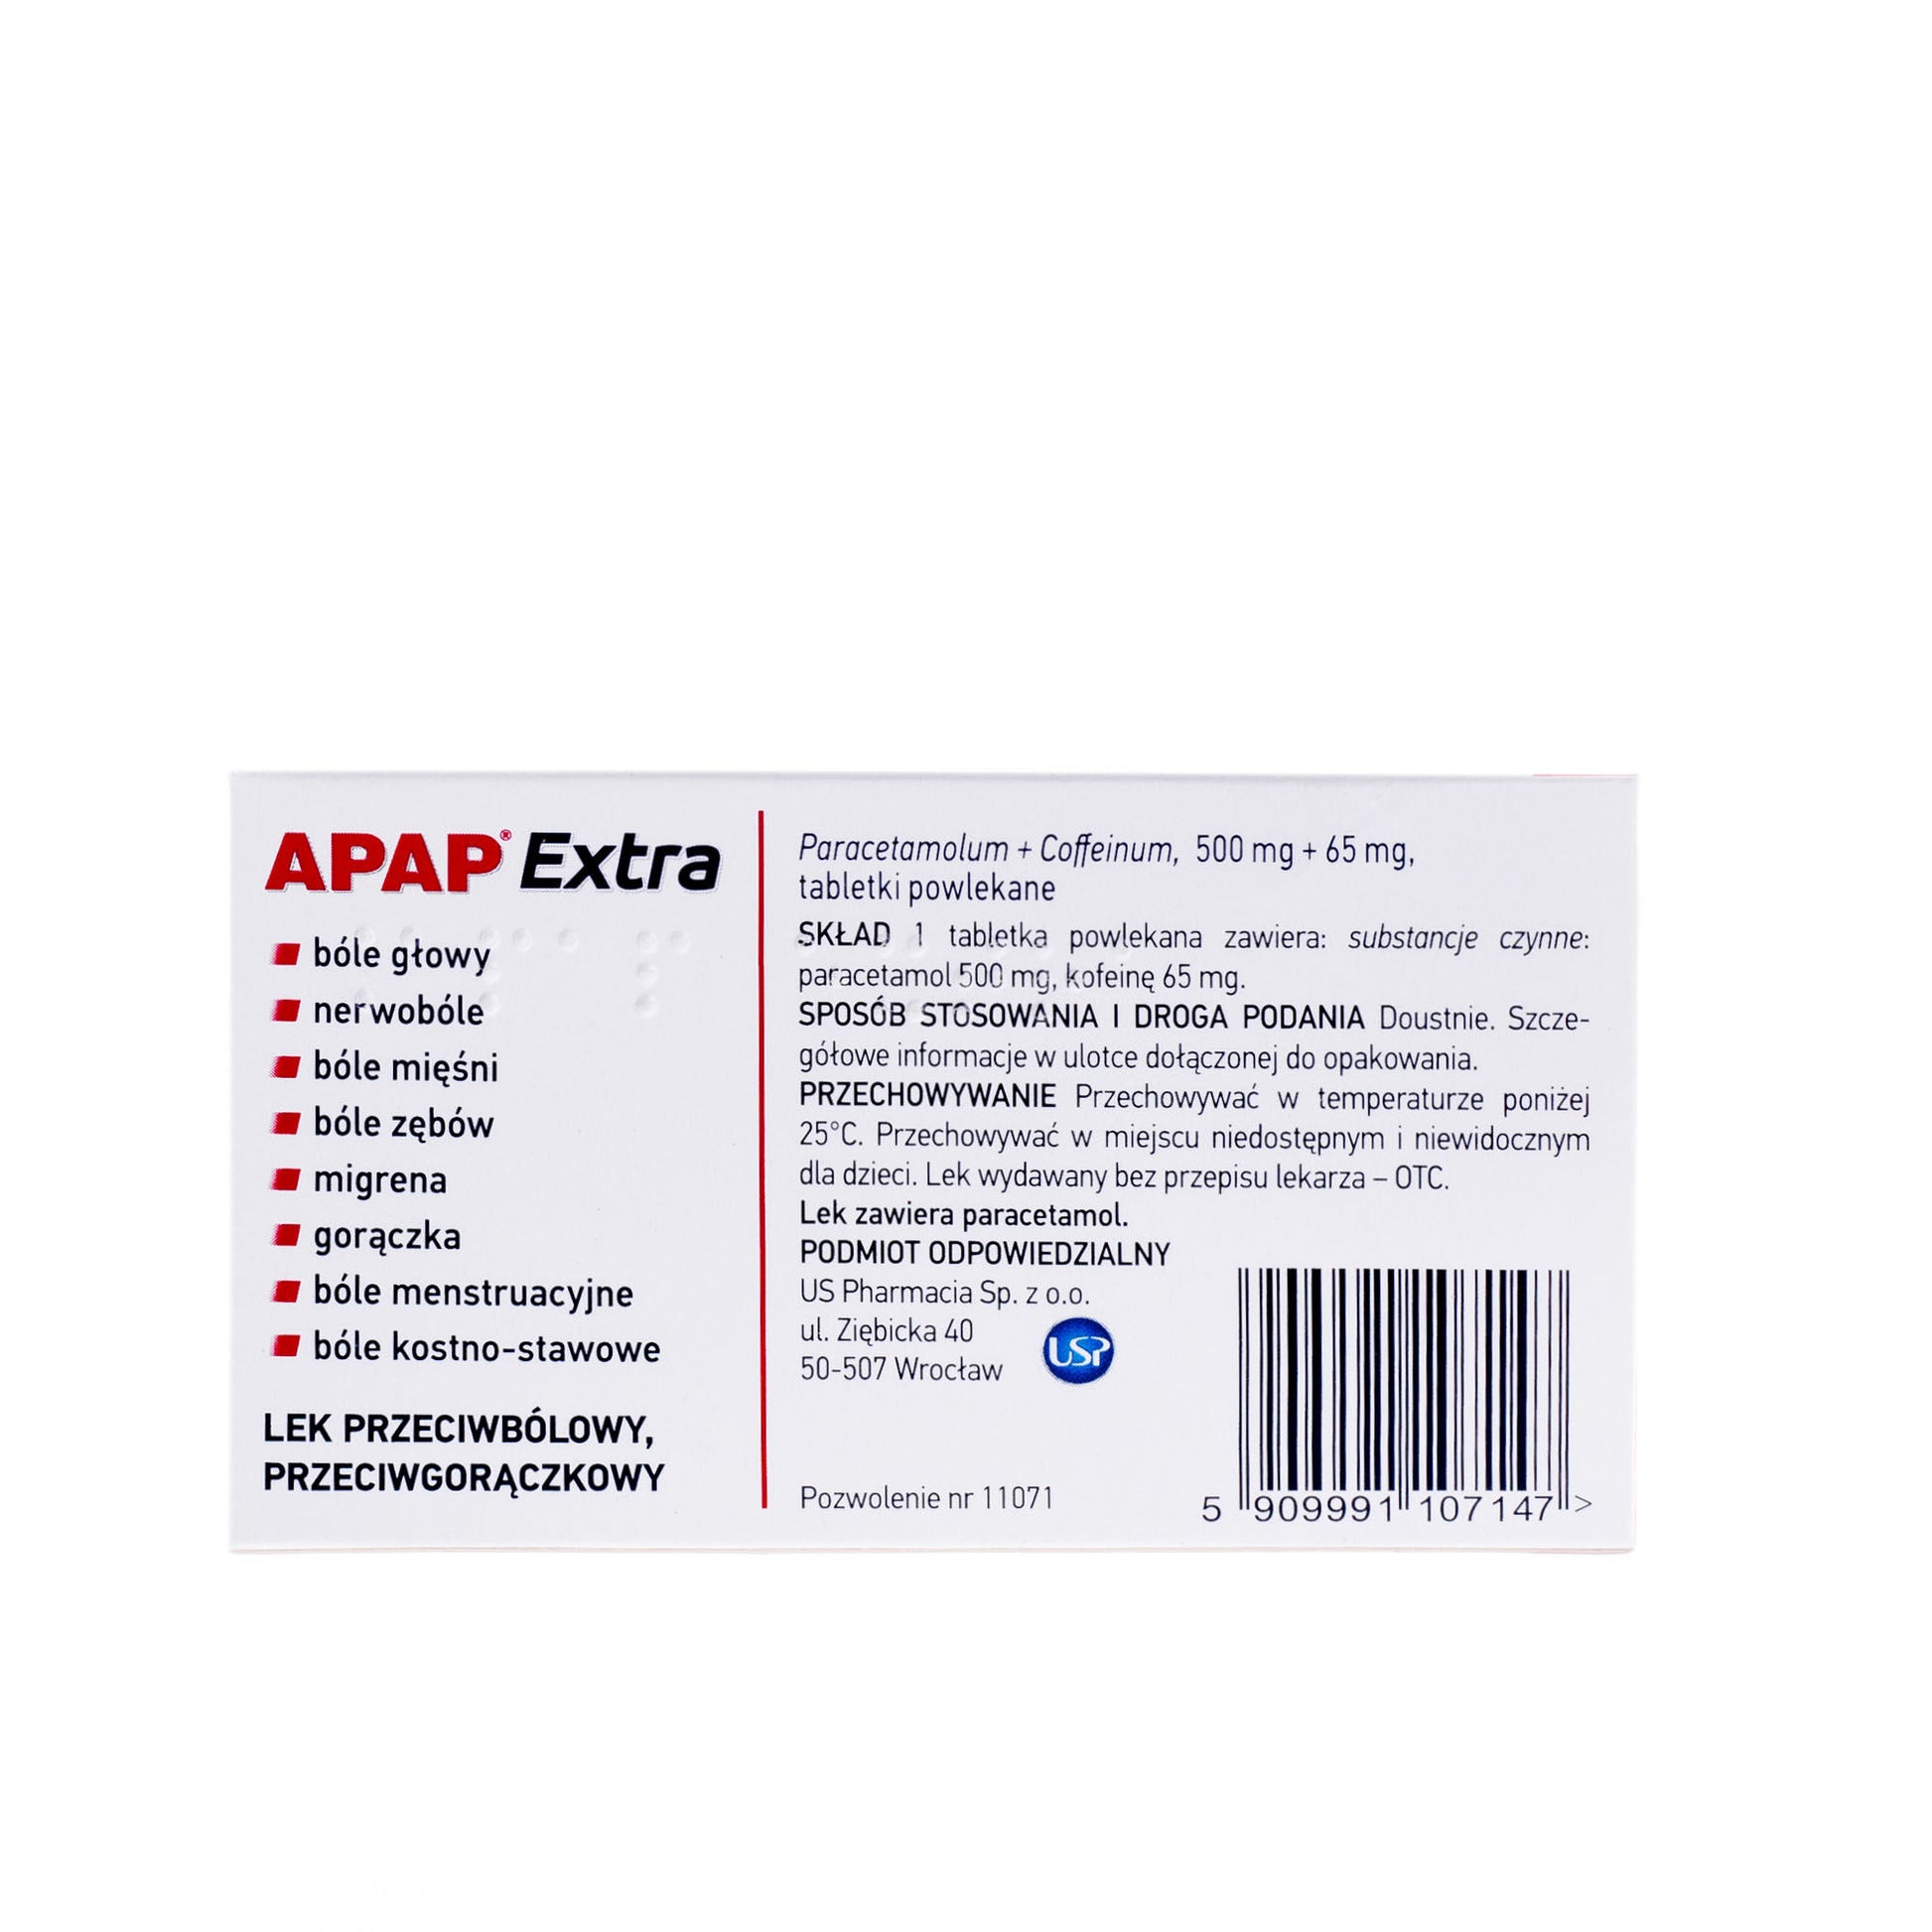 apap extra tablets